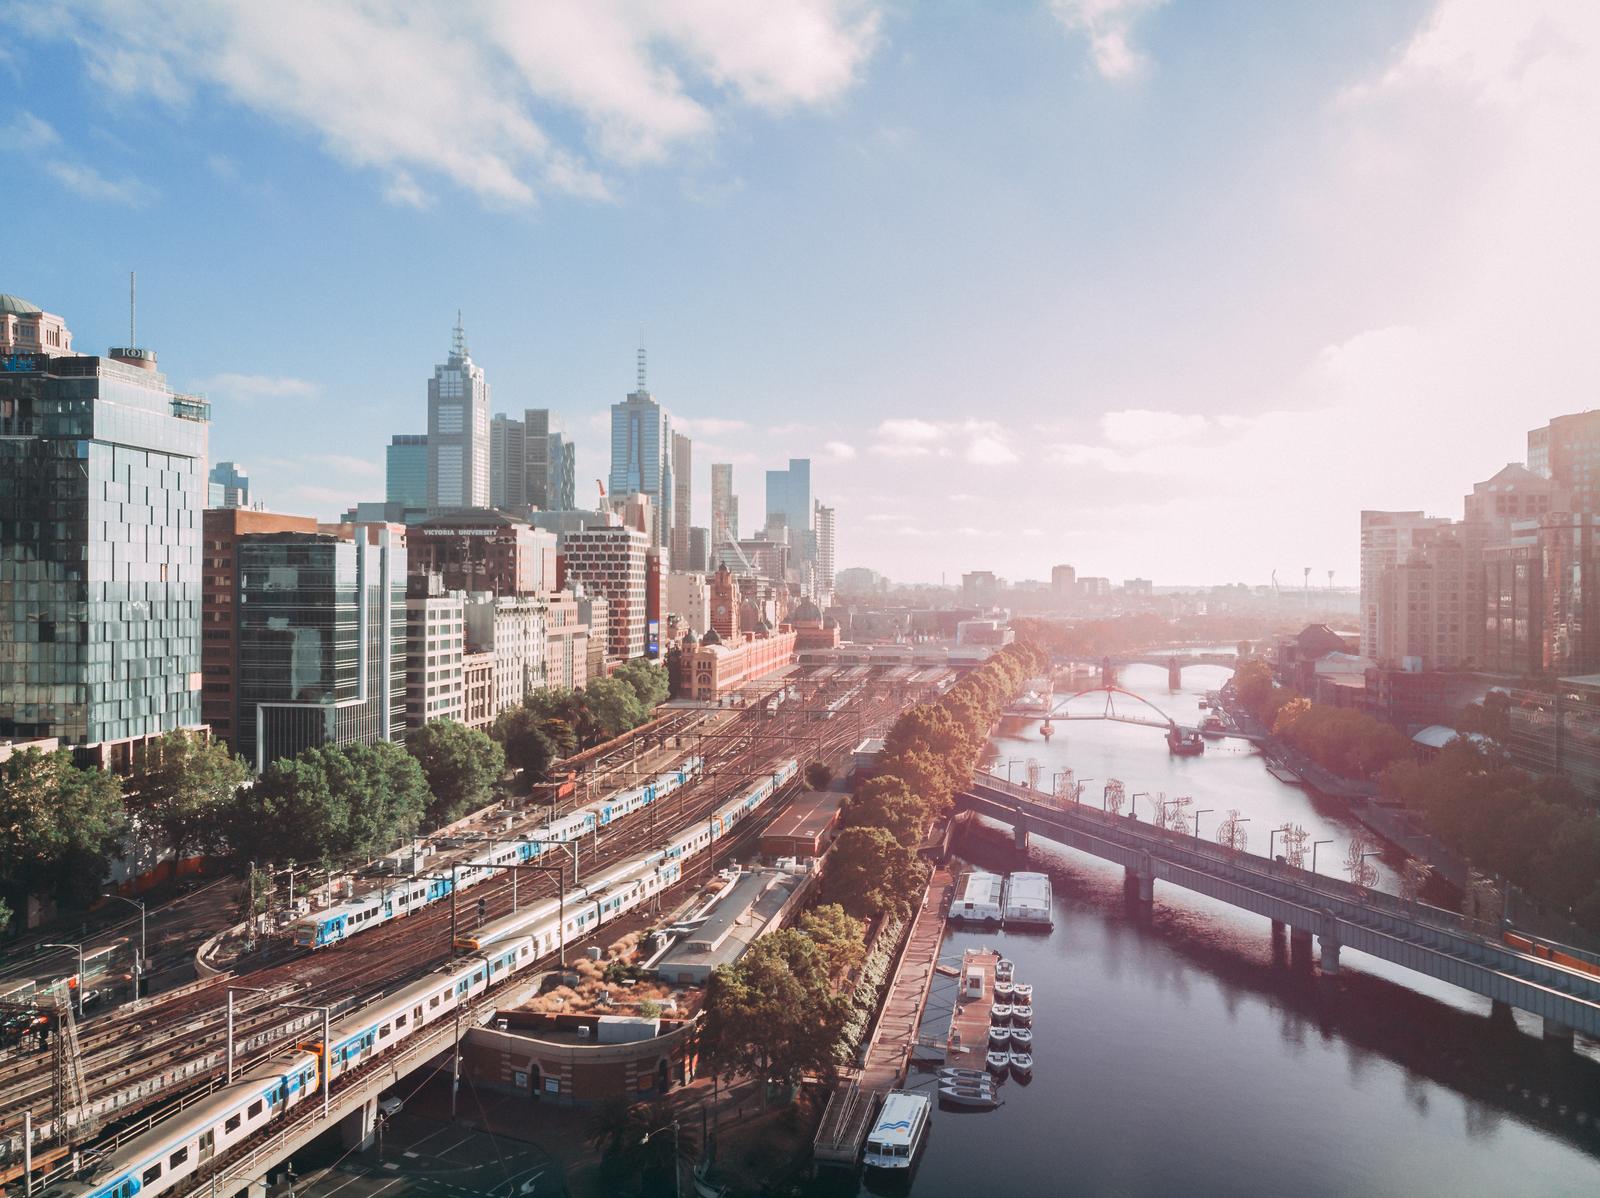 This City-Country Matching Quiz Gets Progressively Harder With Each Question – Can You Keep up With It? Melbourne, Australia